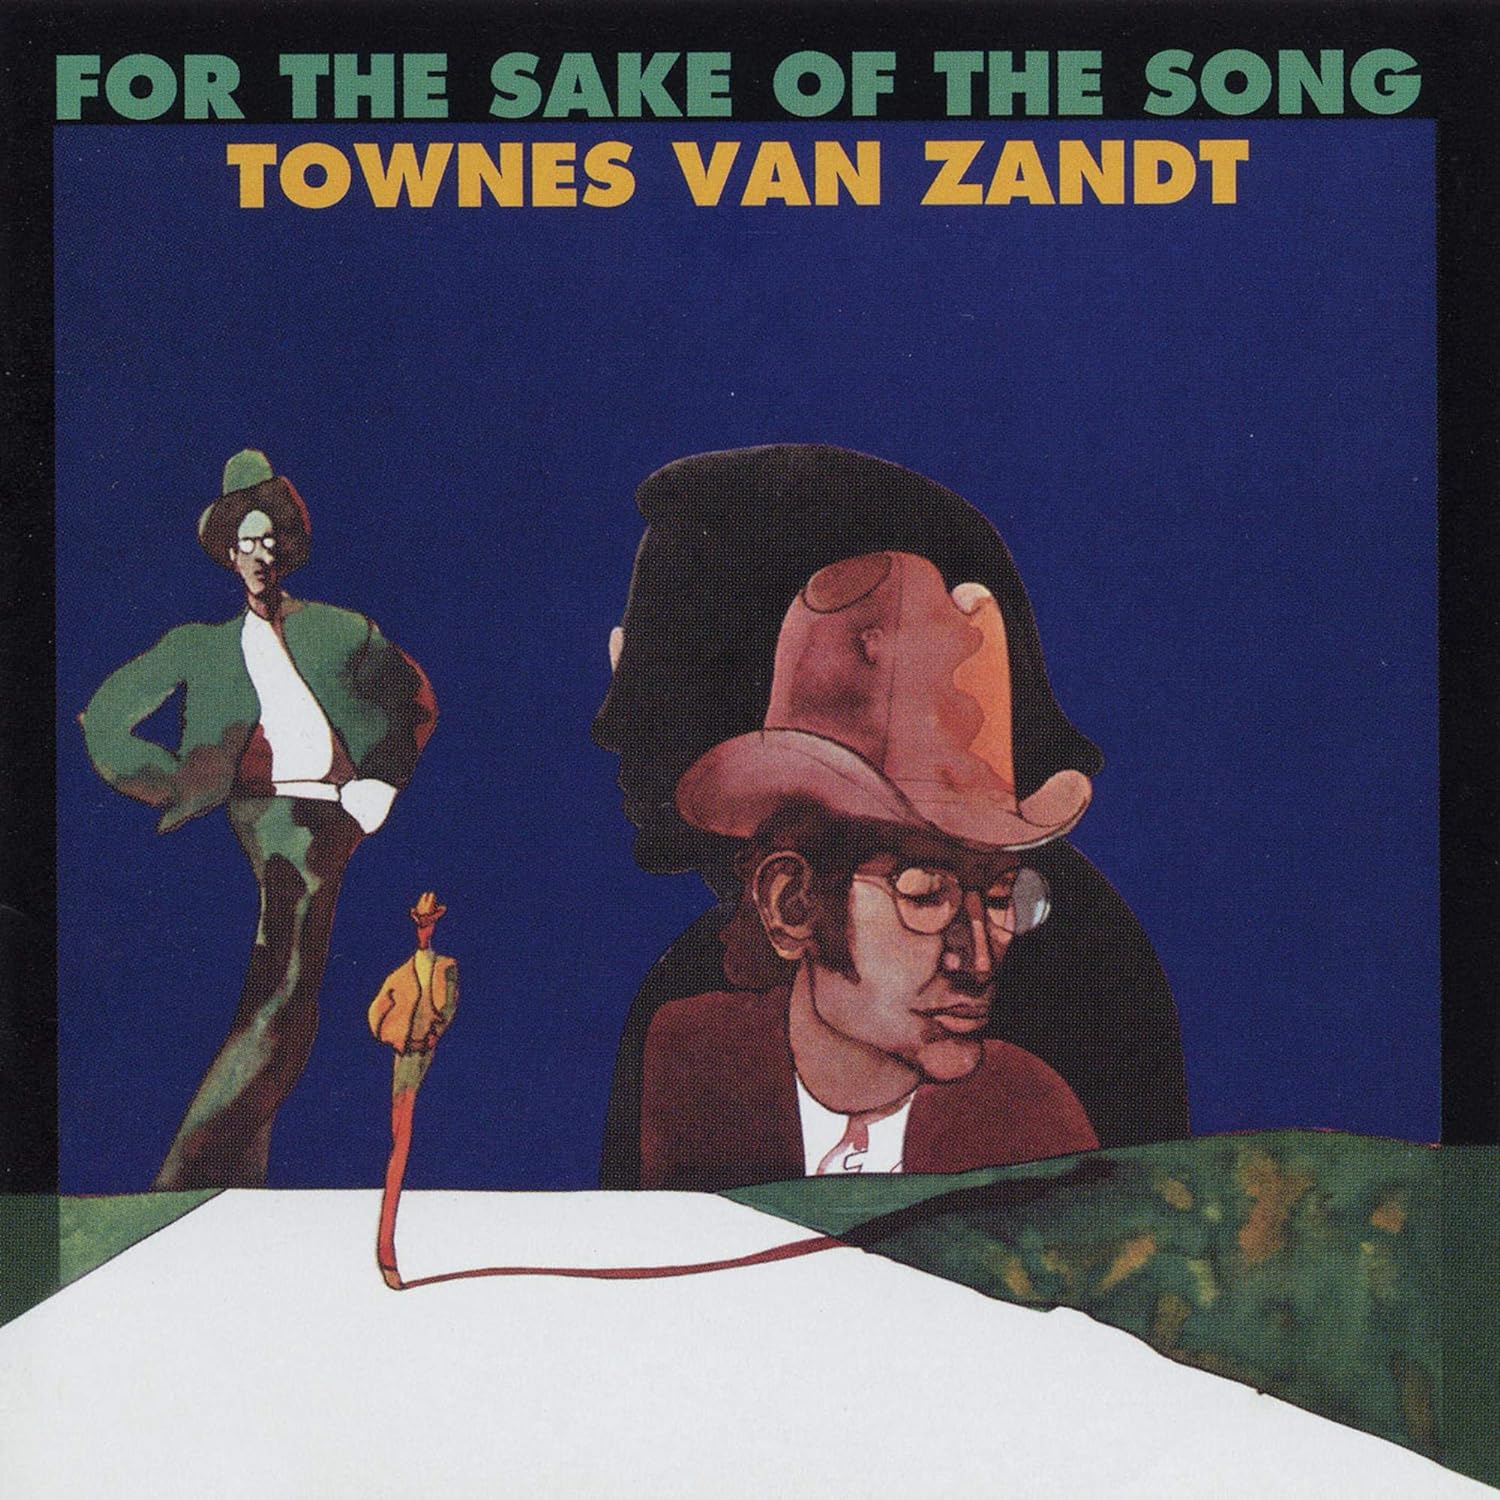 The Voice of the Heartland: Remembering Townes Van Zandt